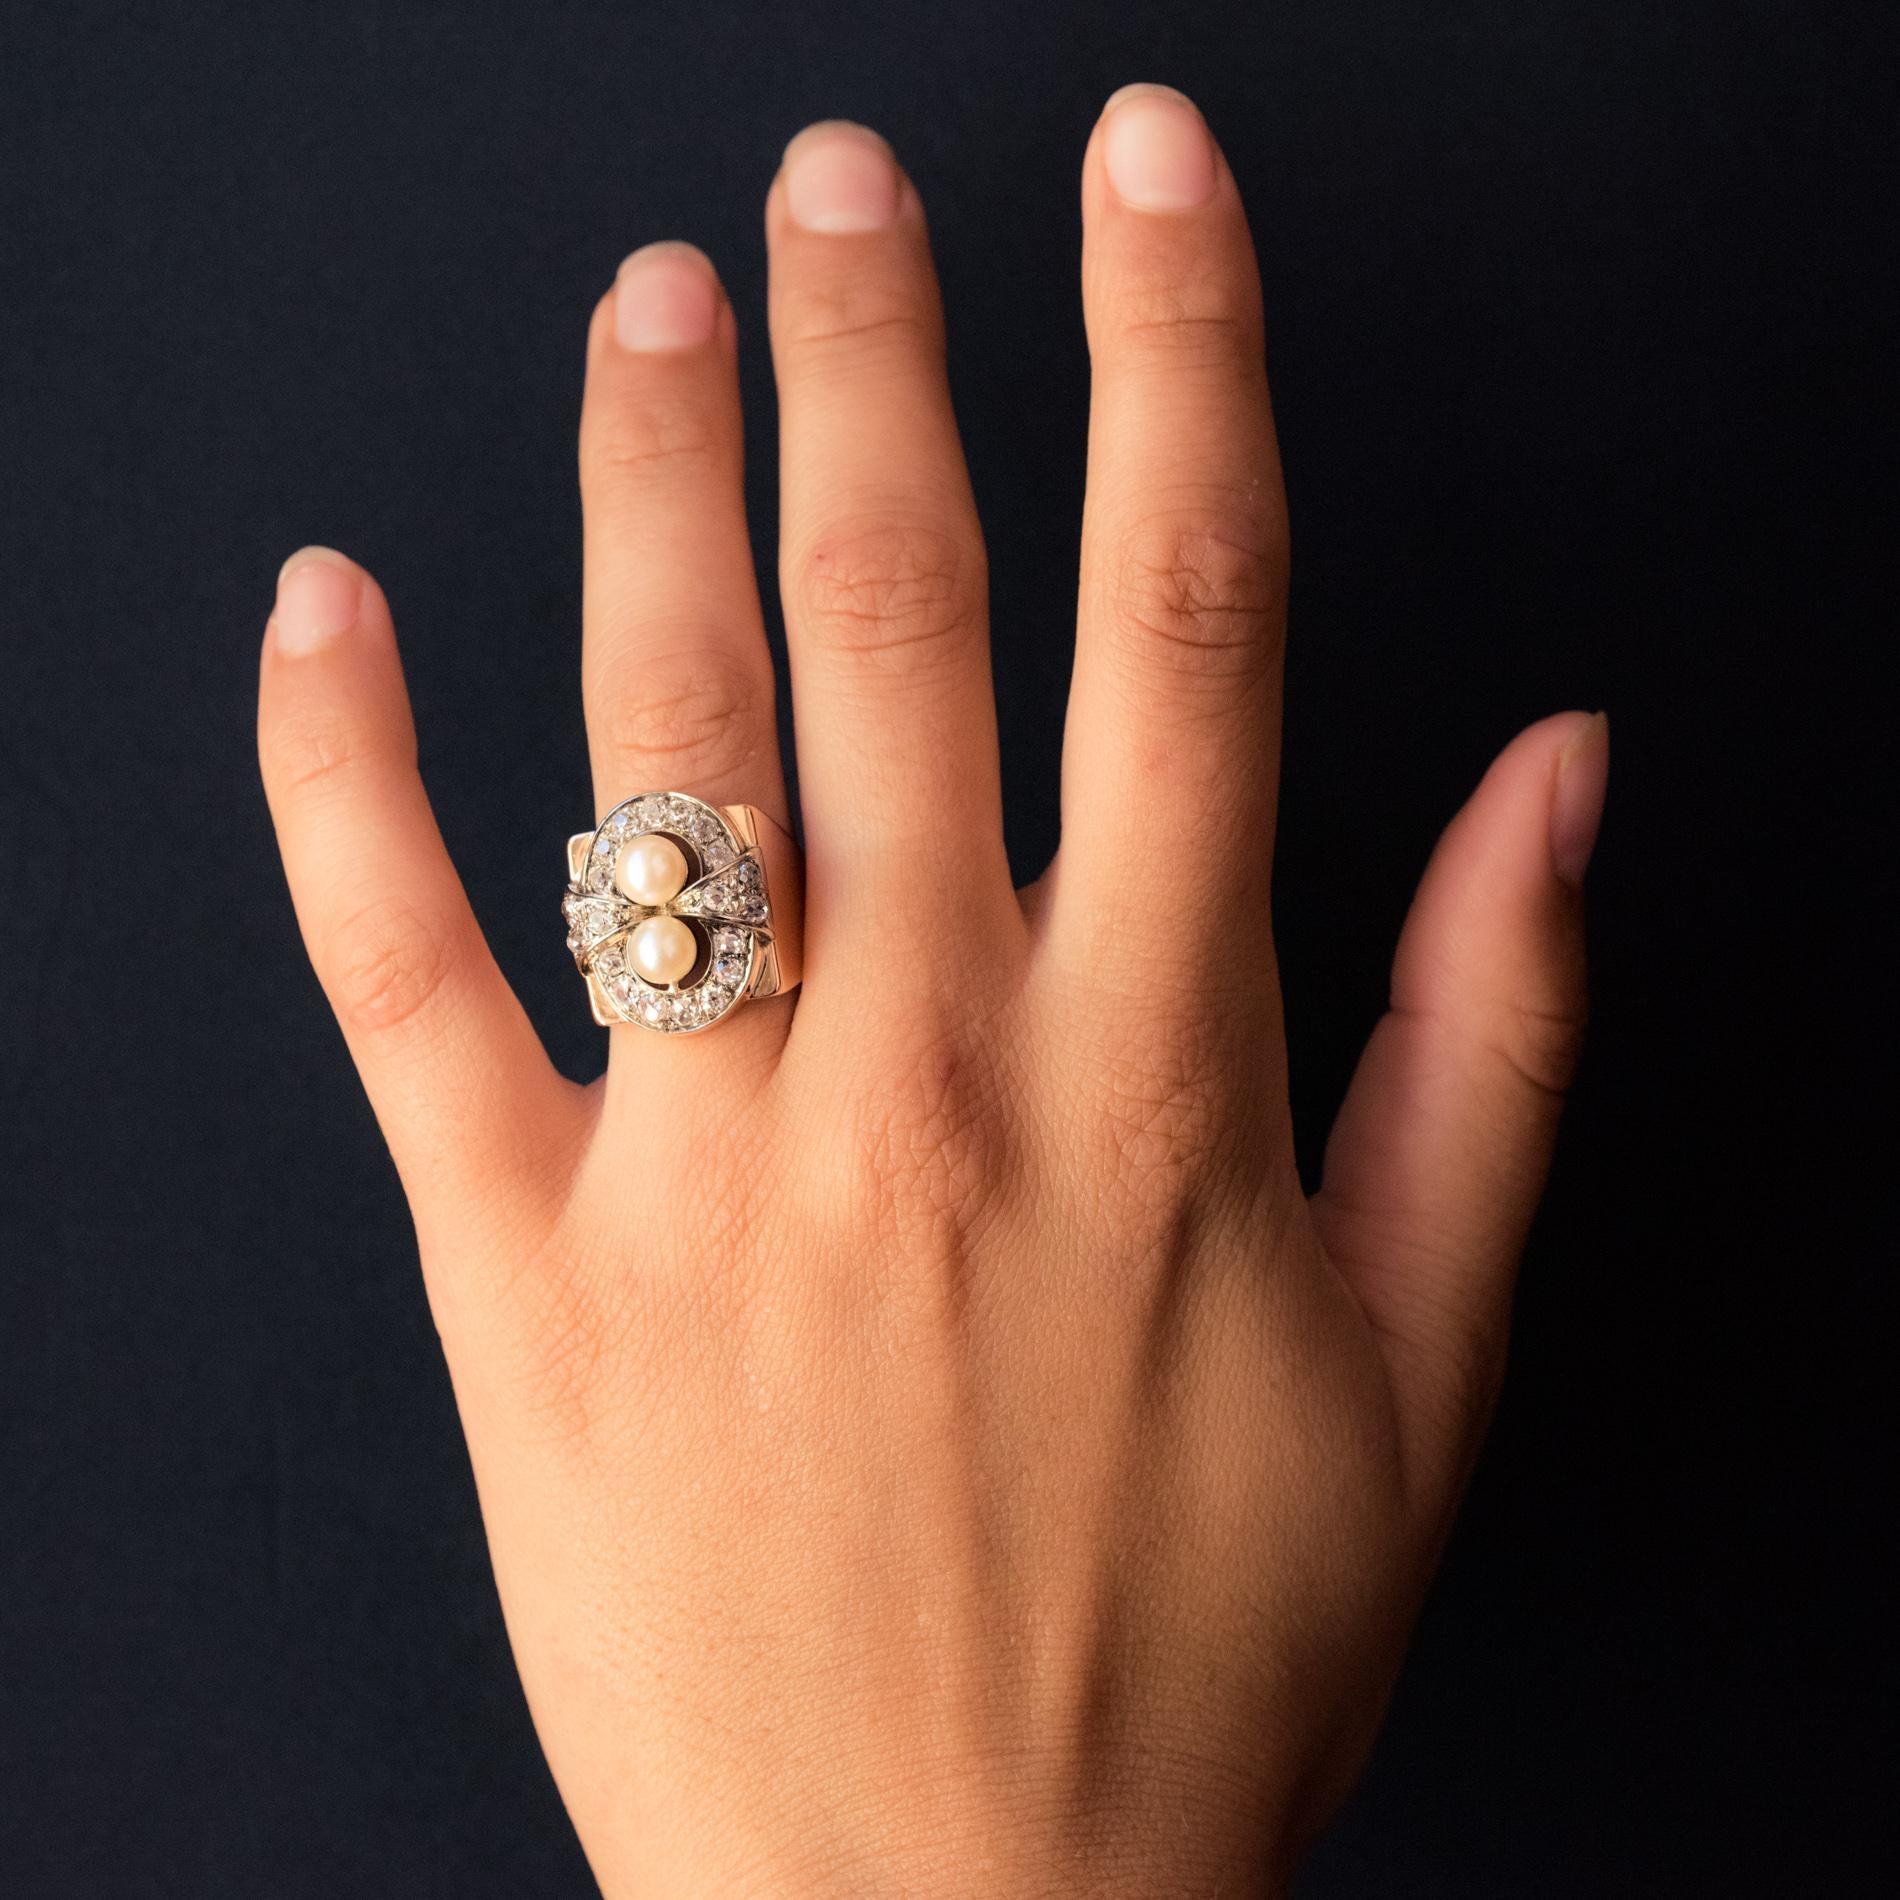 Ring in 18 karat rose gold, owl hallmark and platinum.
Incredible tank ring, it features a large ring which holds a rectangular plate on which are set, on platinum, two half moons adorned with 2x7 antique brilliant-cut diamonds, two arrowhead